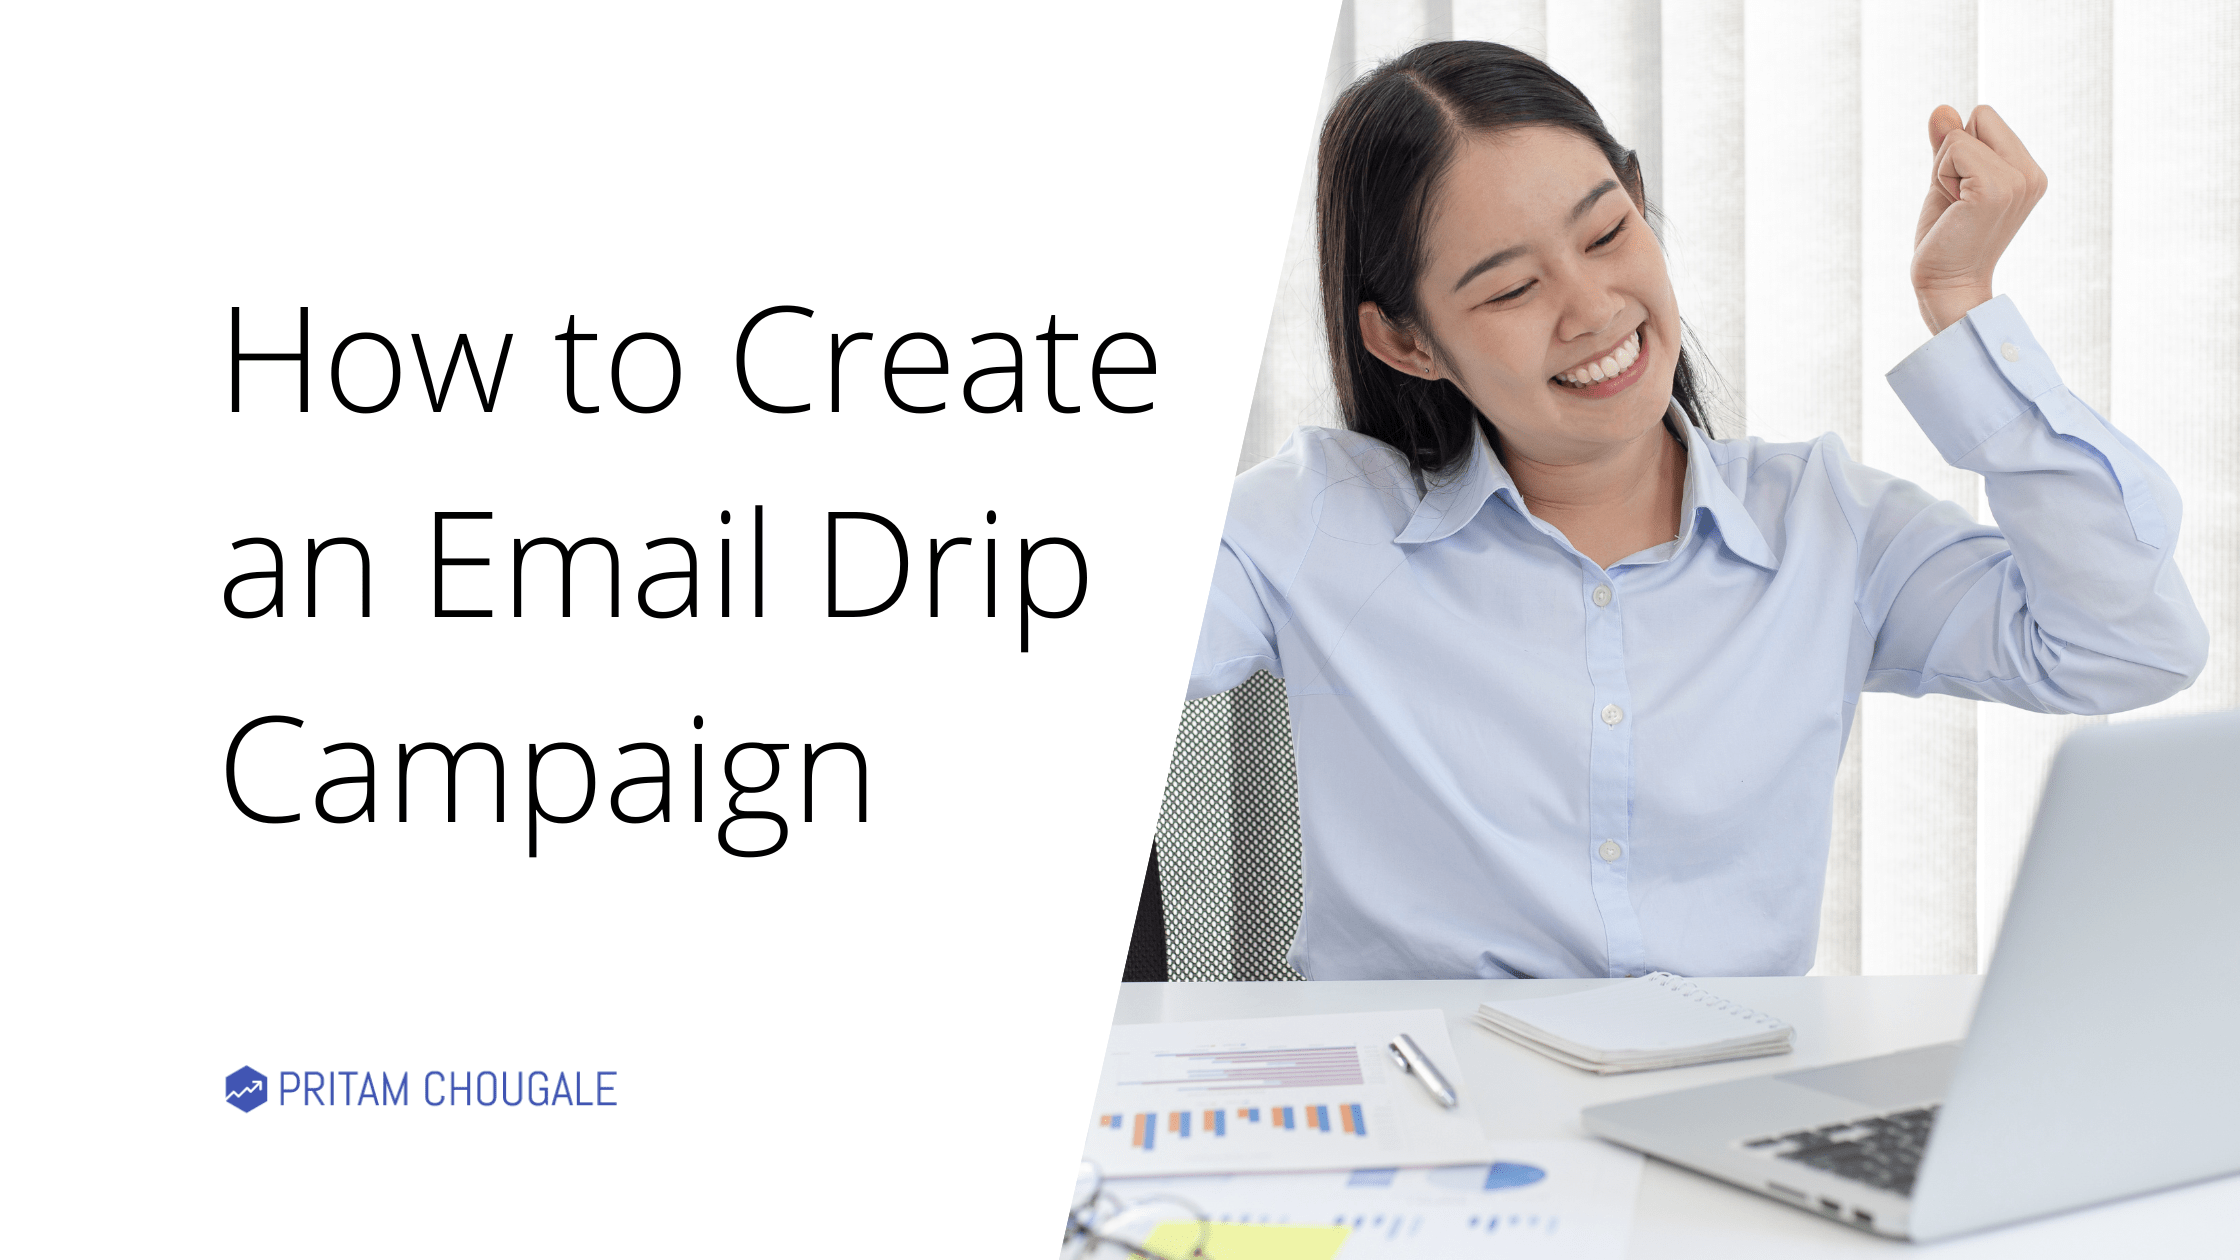 How to create an email drip campaign